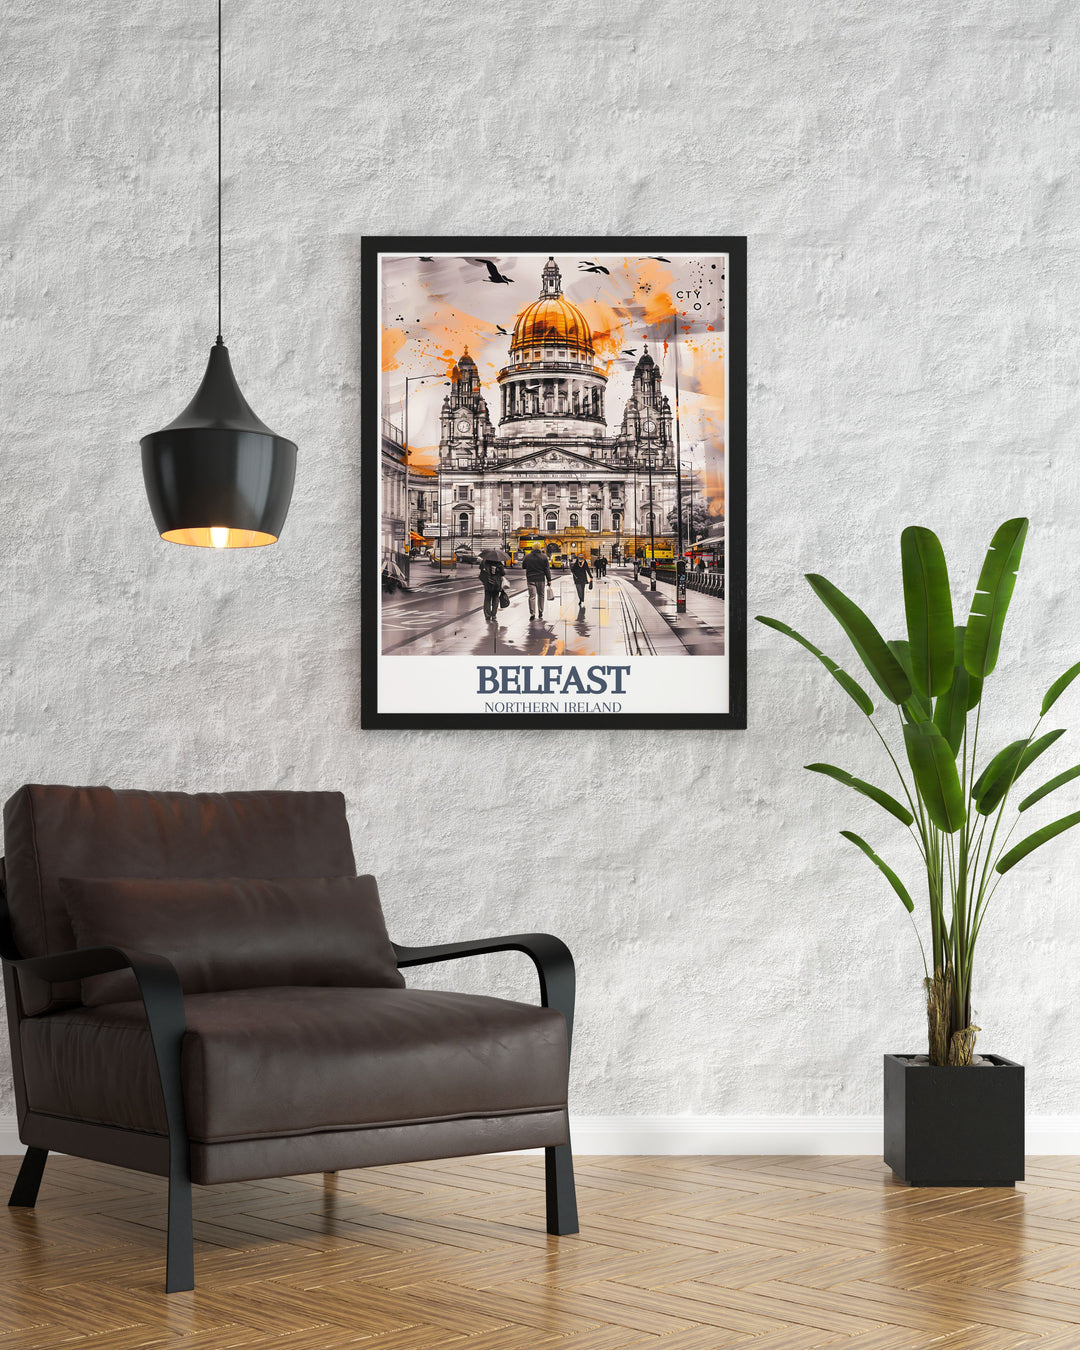 Unique City Hall Donegall Square poster highlighting the historic charm of Belfasts City Hall and vibrant Donegall Square. This Ireland artwork is a great gift idea for those who appreciate Belfast city art and want to bring UK art into their space.